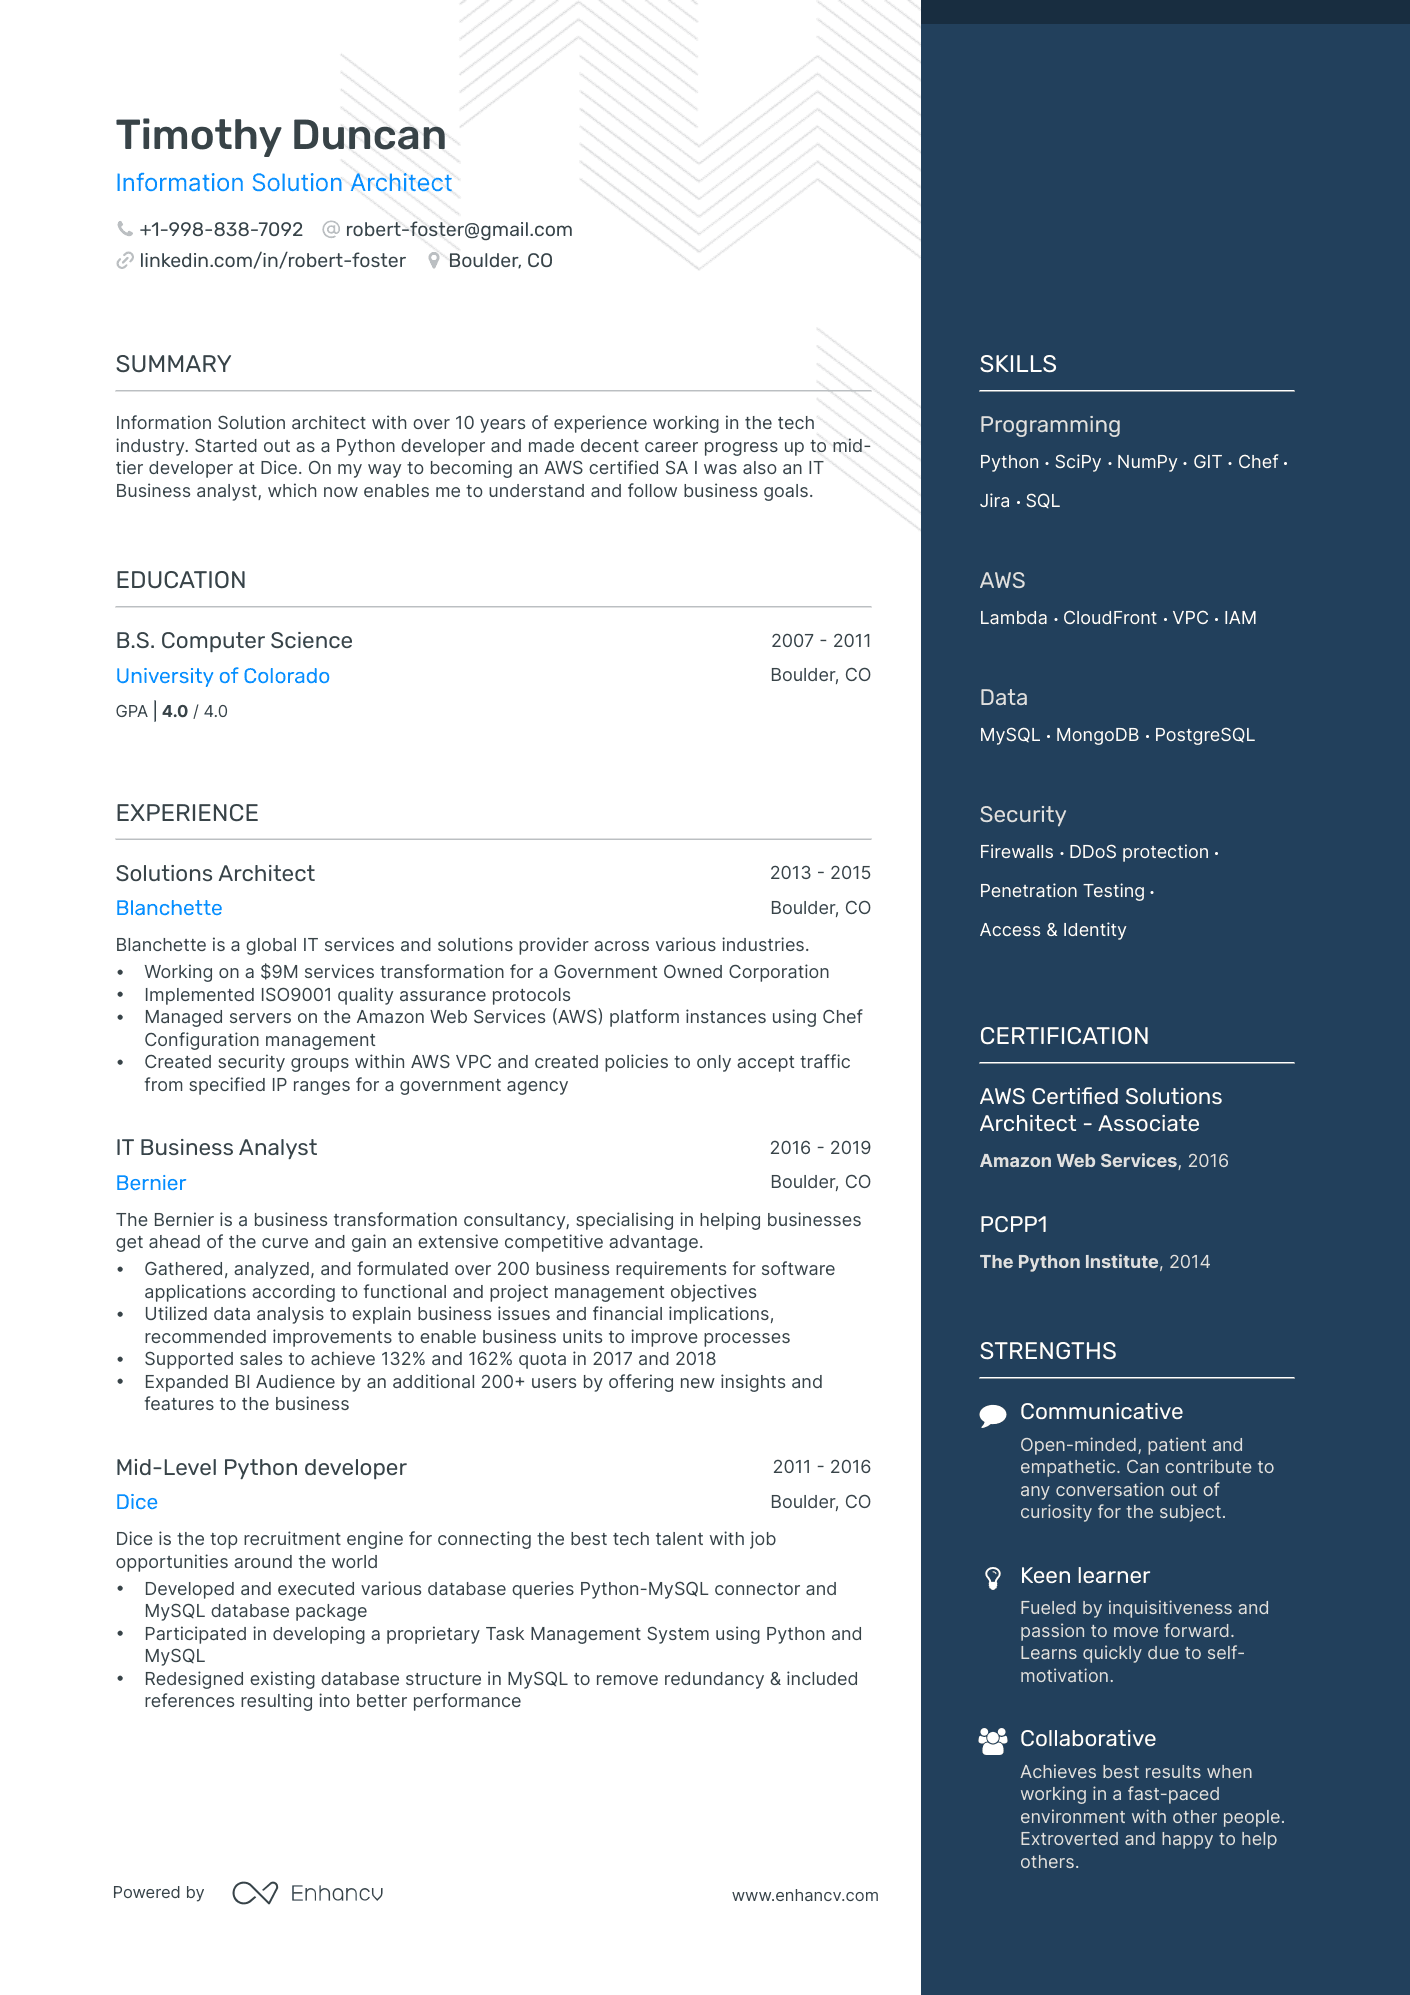 Information Solution Architect resume example